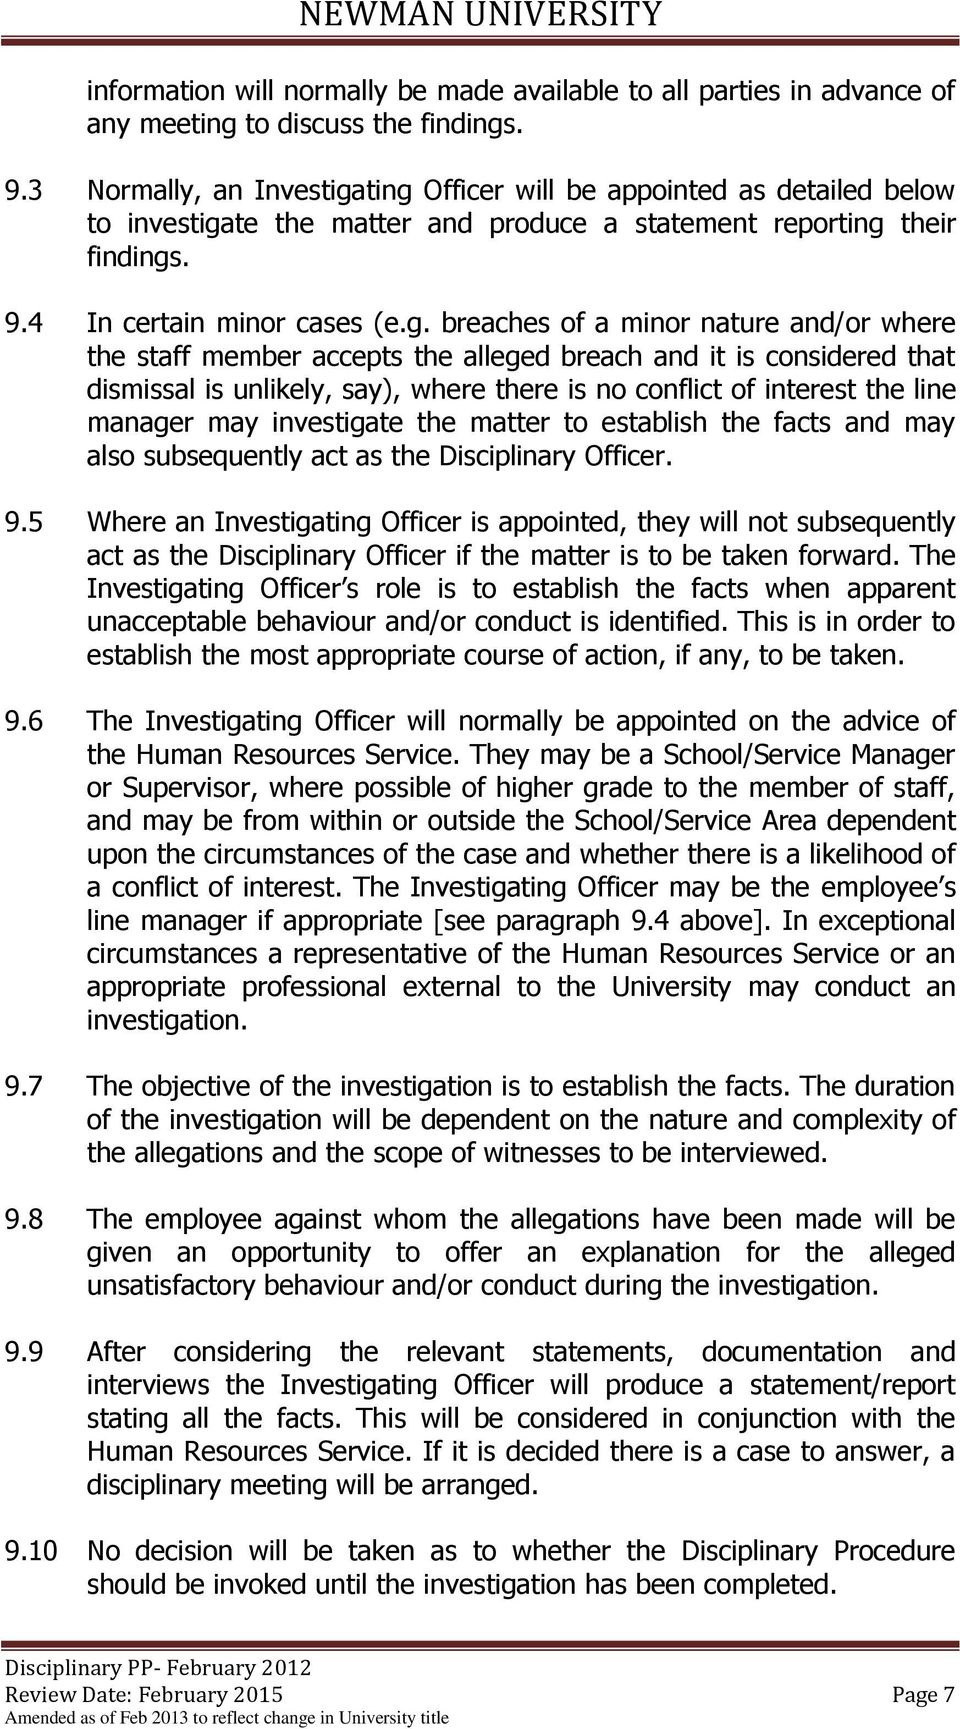 ting Officer will be appointed as detailed below to investigate the matter and produce a statement reporting their findings. 9.4 In certain minor cases (e.g. breaches of a minor nature and/or where